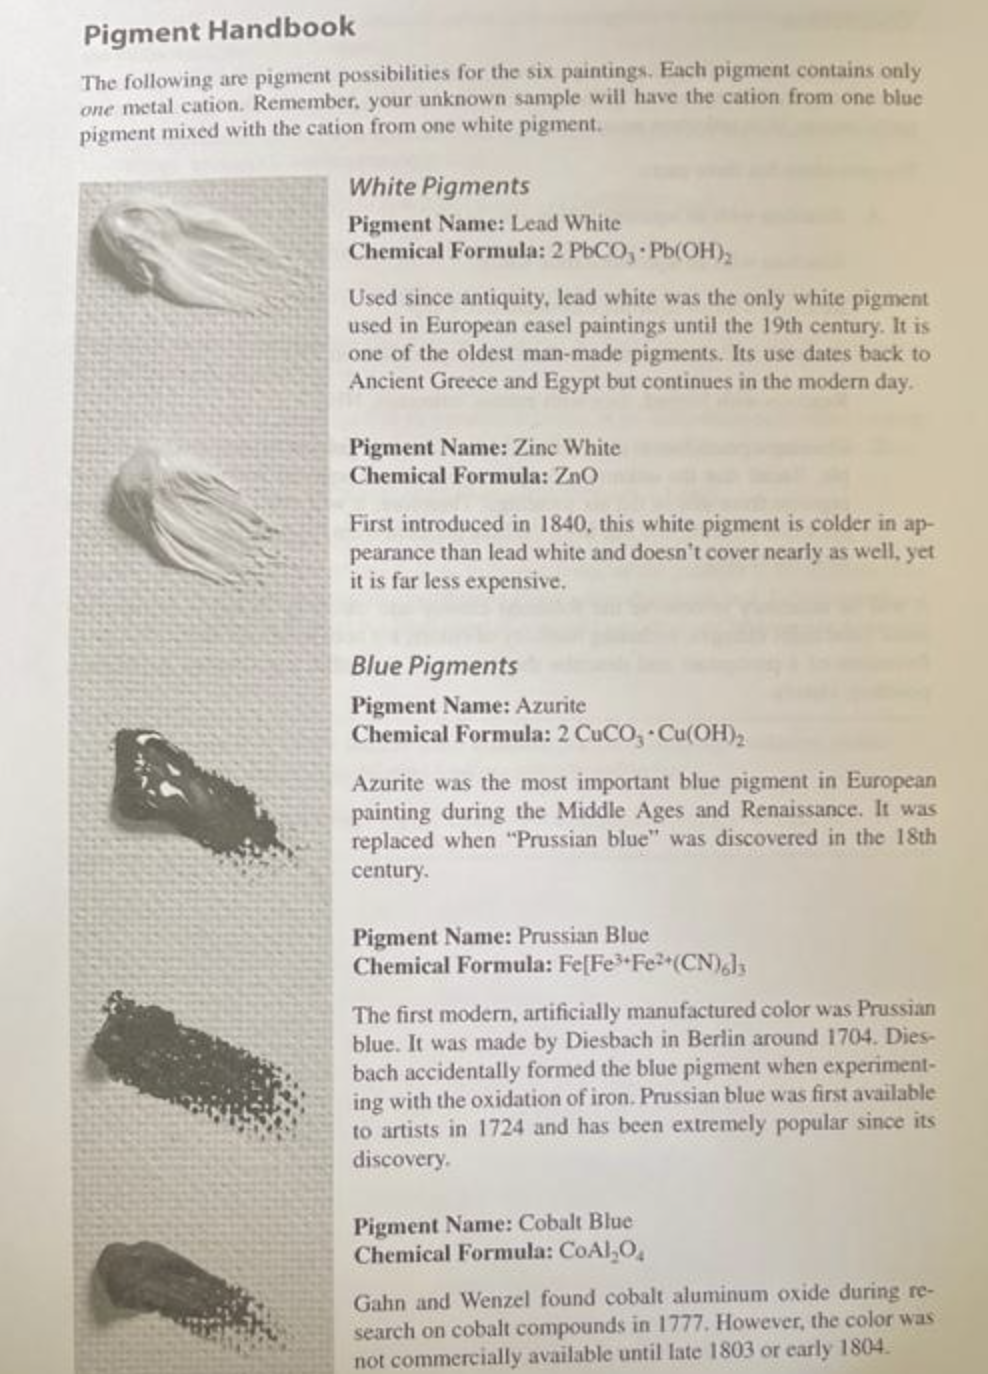 Most Important Blue Pigment in European Painting